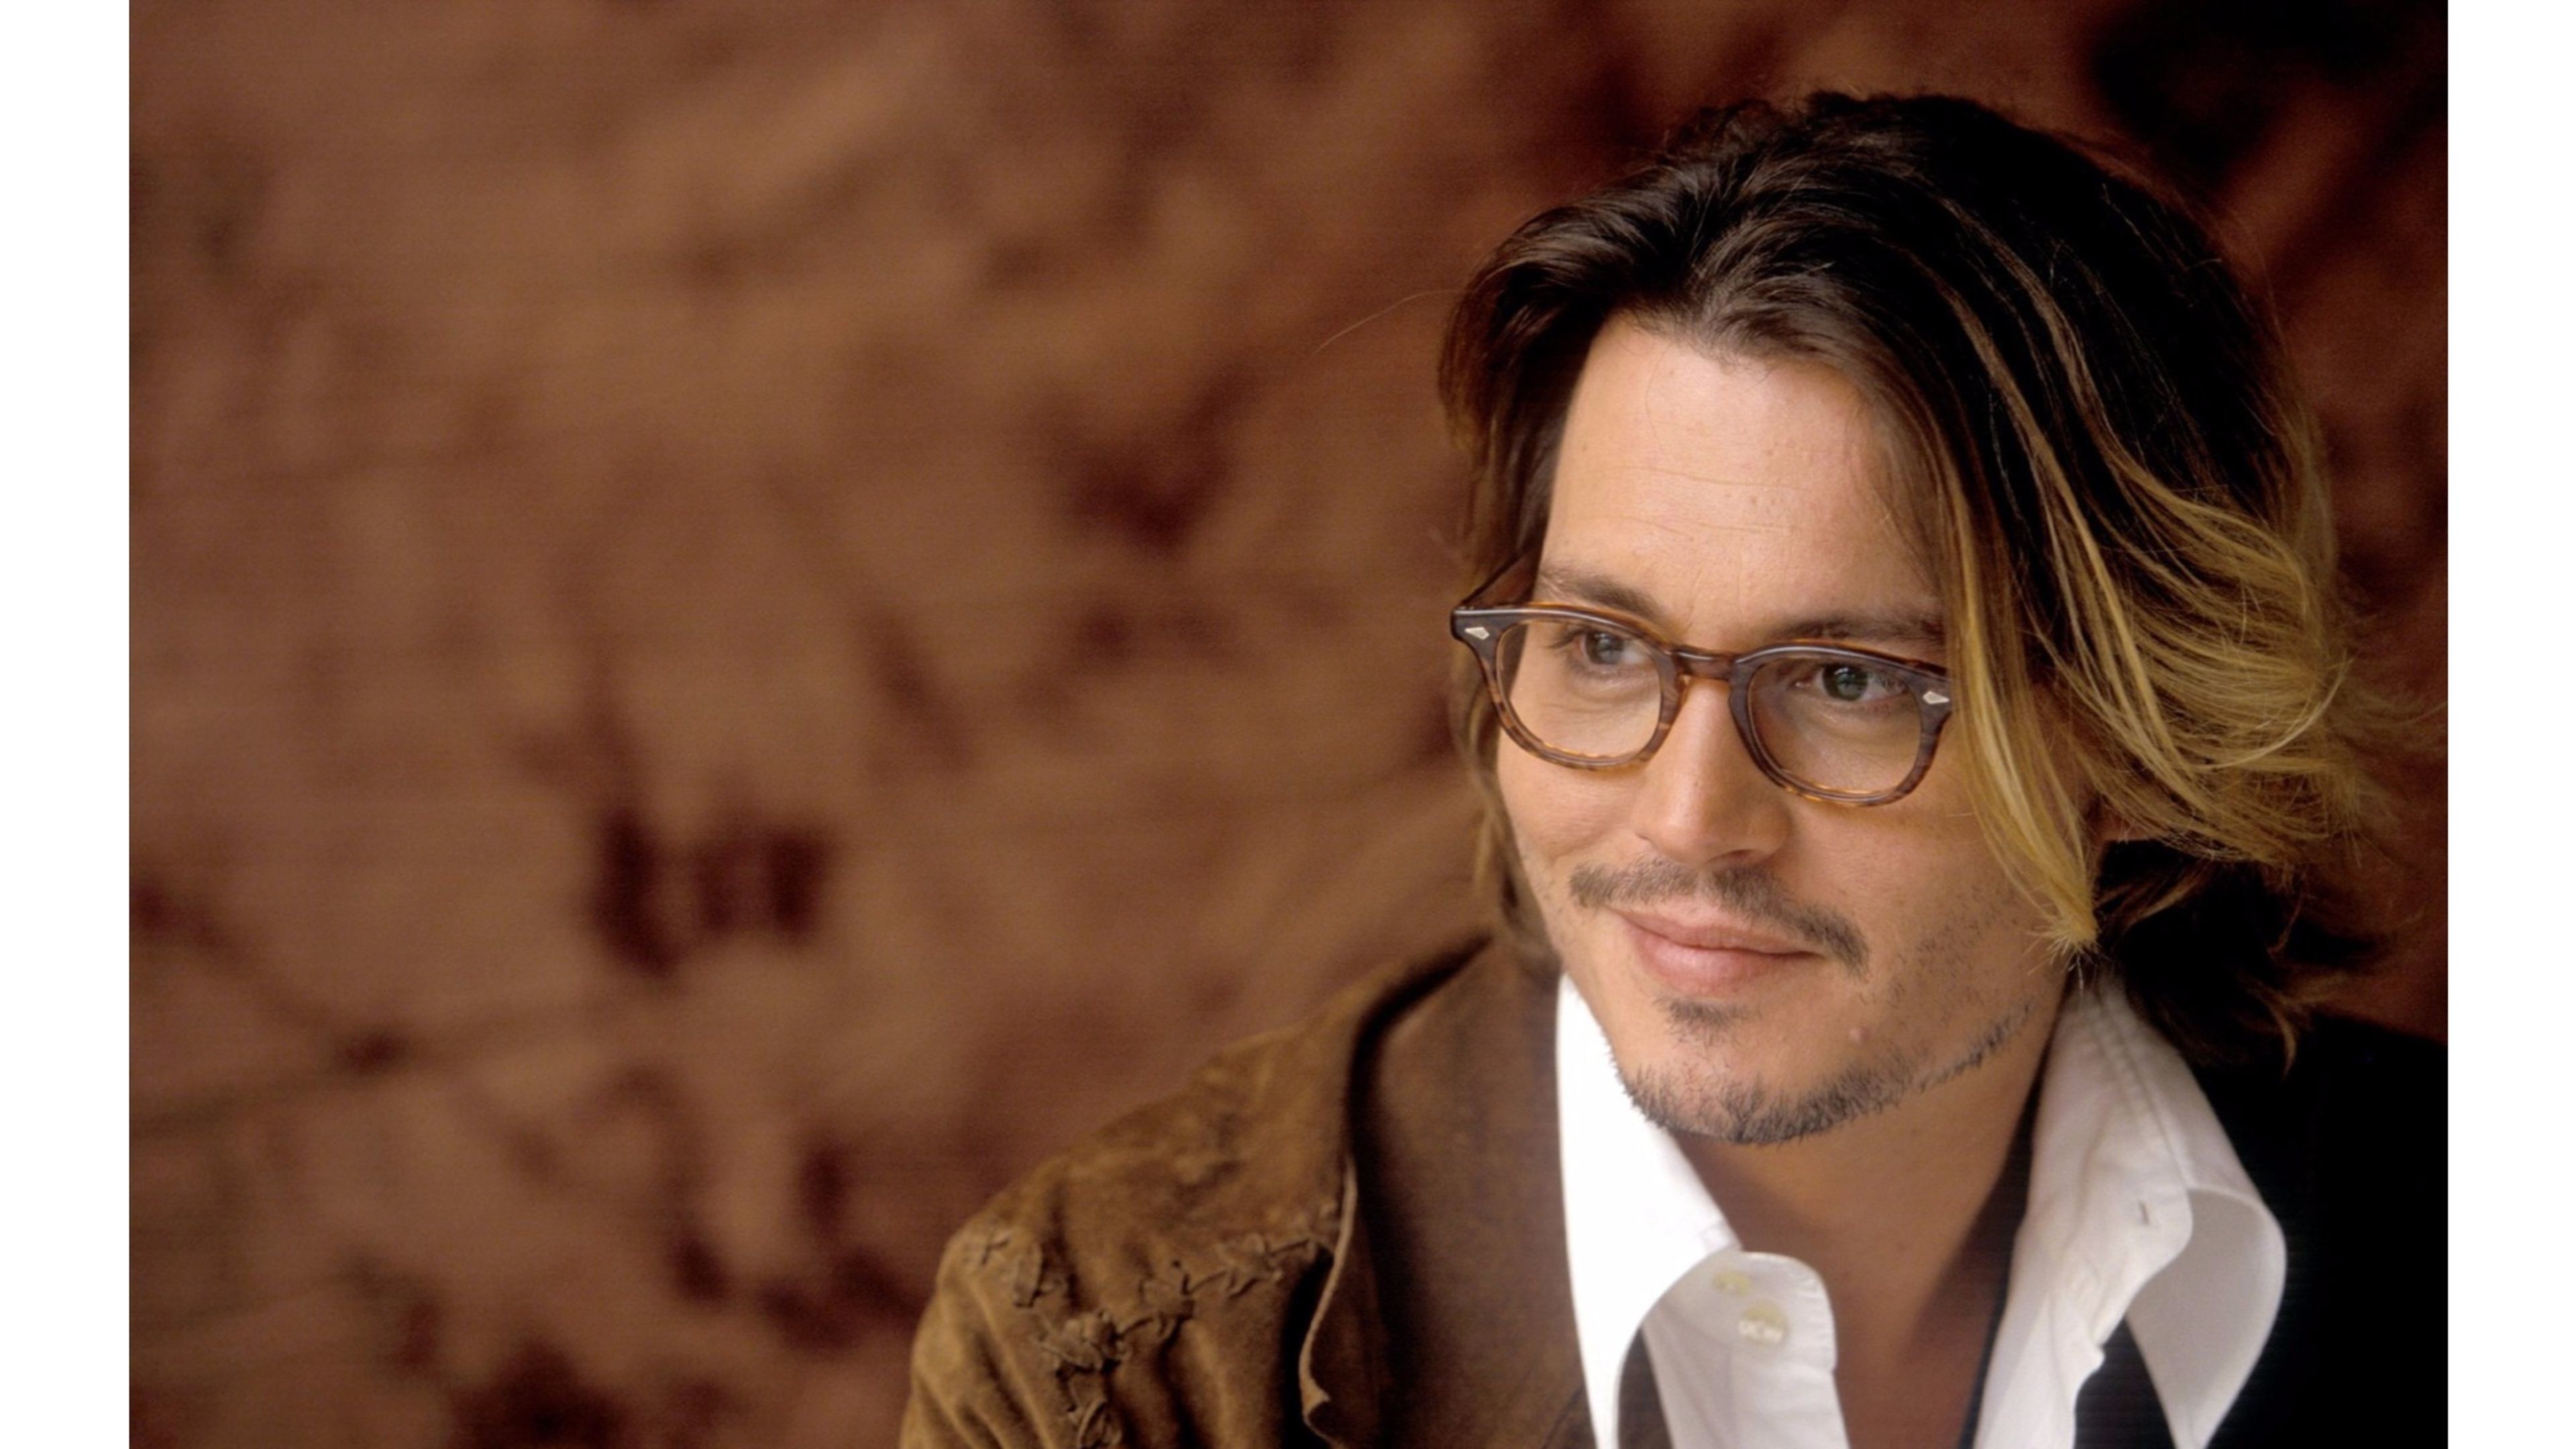 3840x2160 Johnny Depp HD Wallpapers Backgrounds Wallpaper | HD Wallpapers | Pinterest  | Johnny depp, Hd wallpaper and Wallpaper